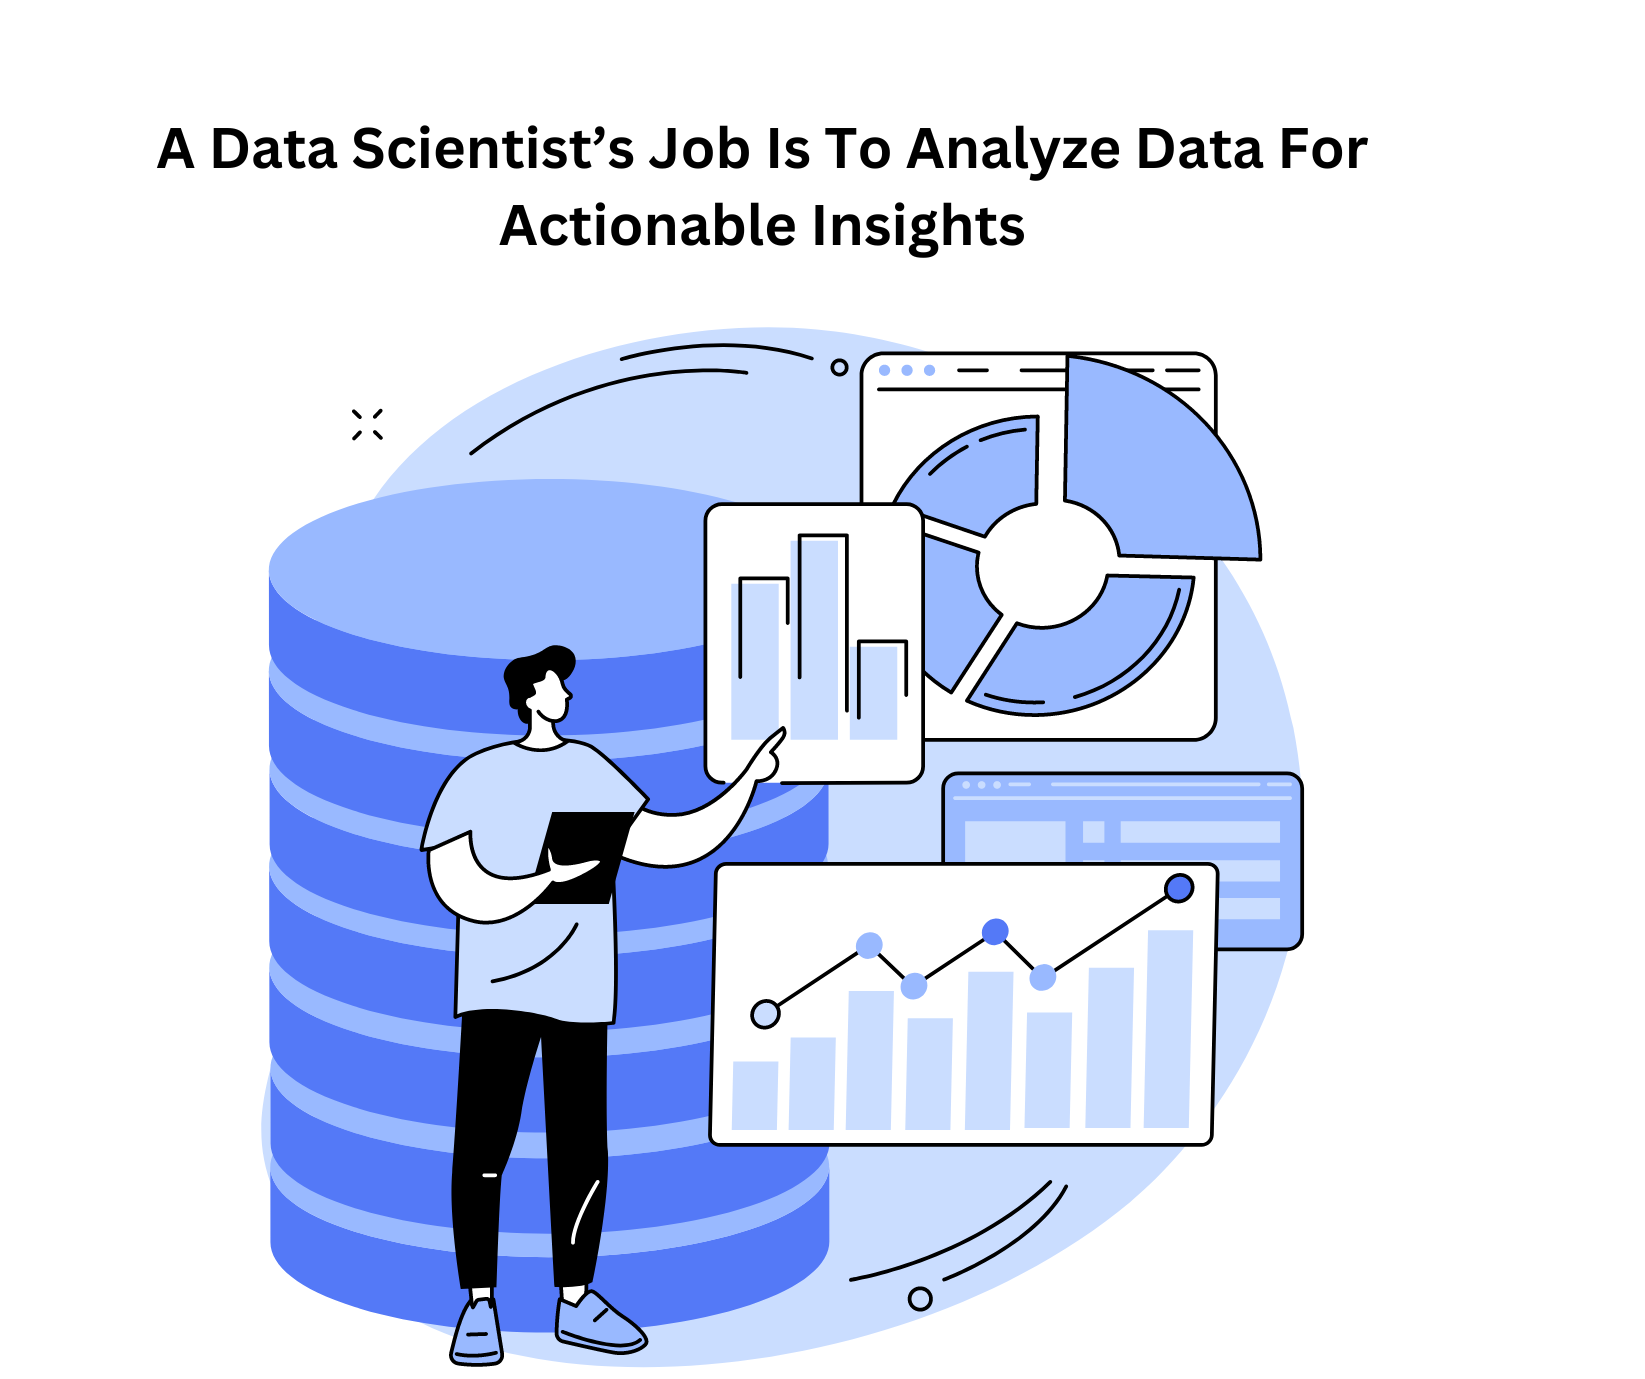 A Data Scientist’s Job Is To Analyze Data For Actionable Insights.